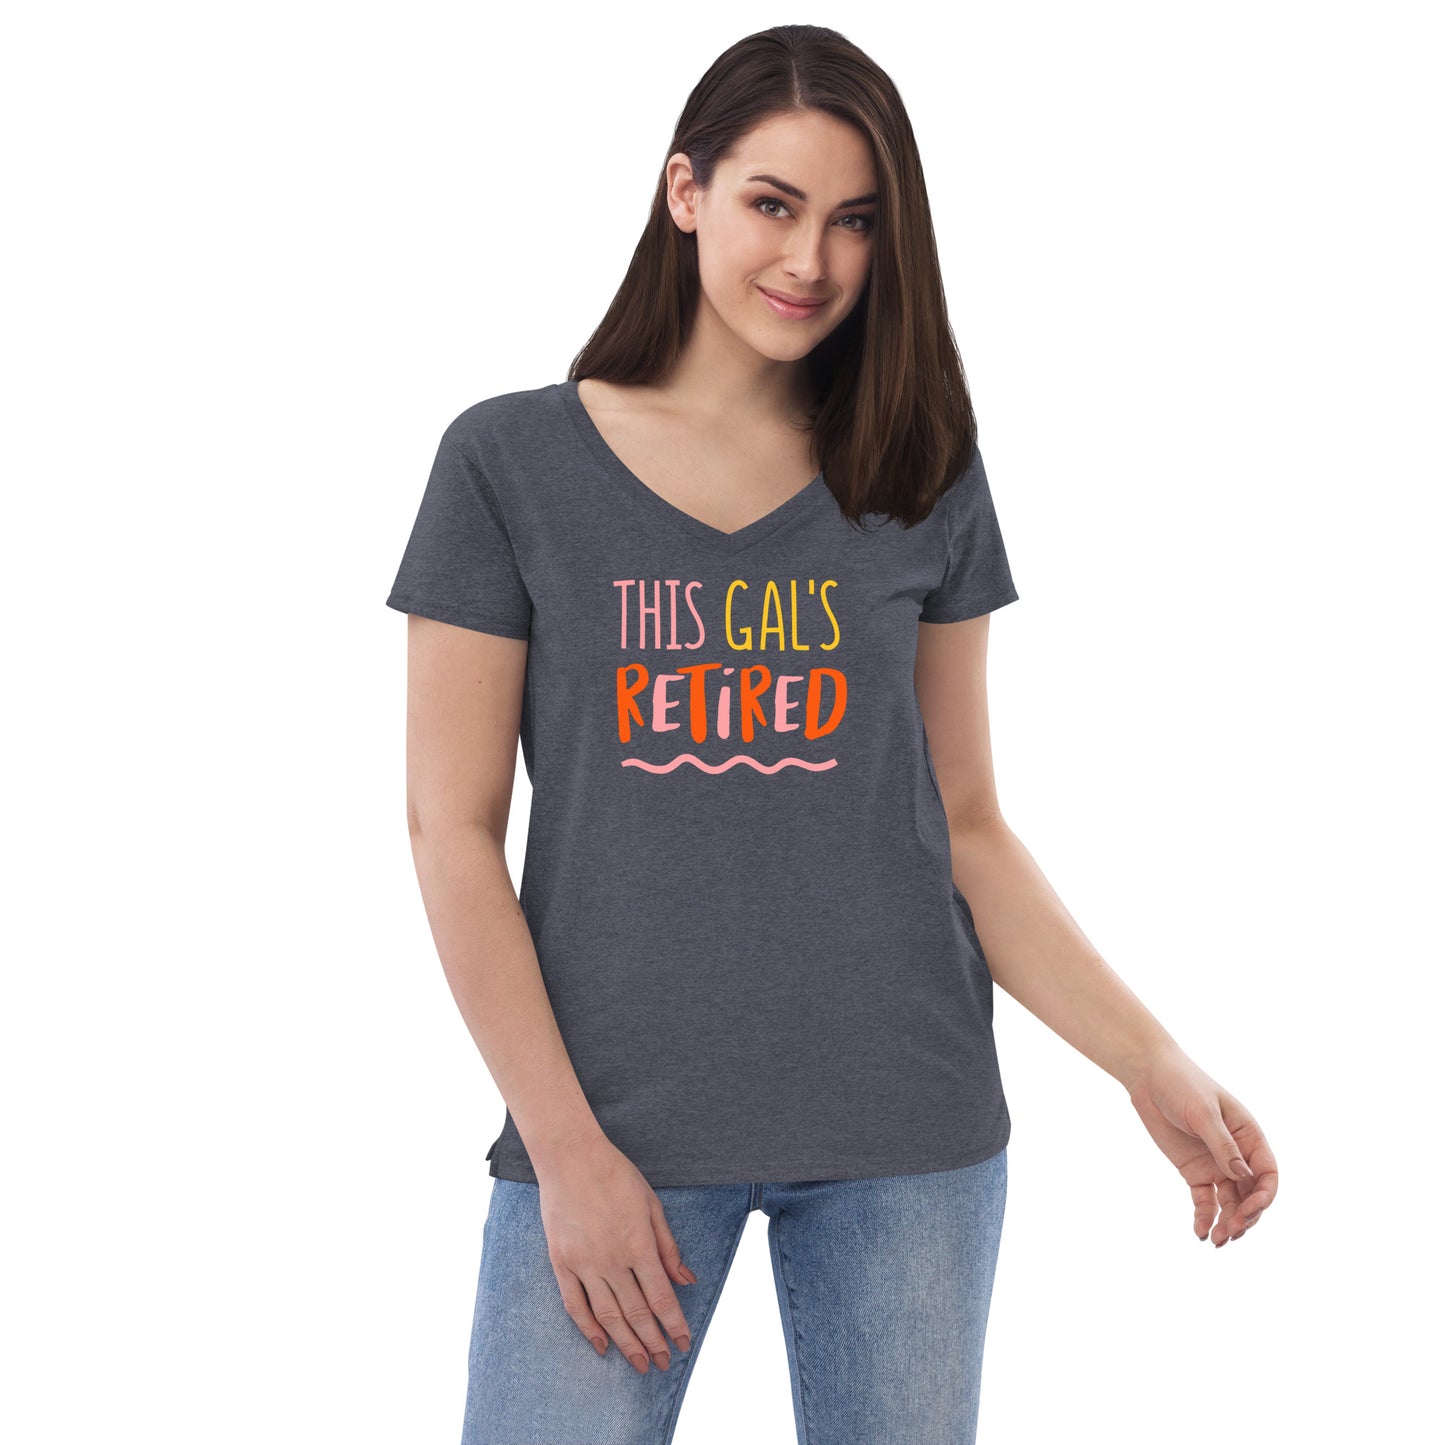 This Gal's Retired - Women’s Recycled V-Neck T-Shirt